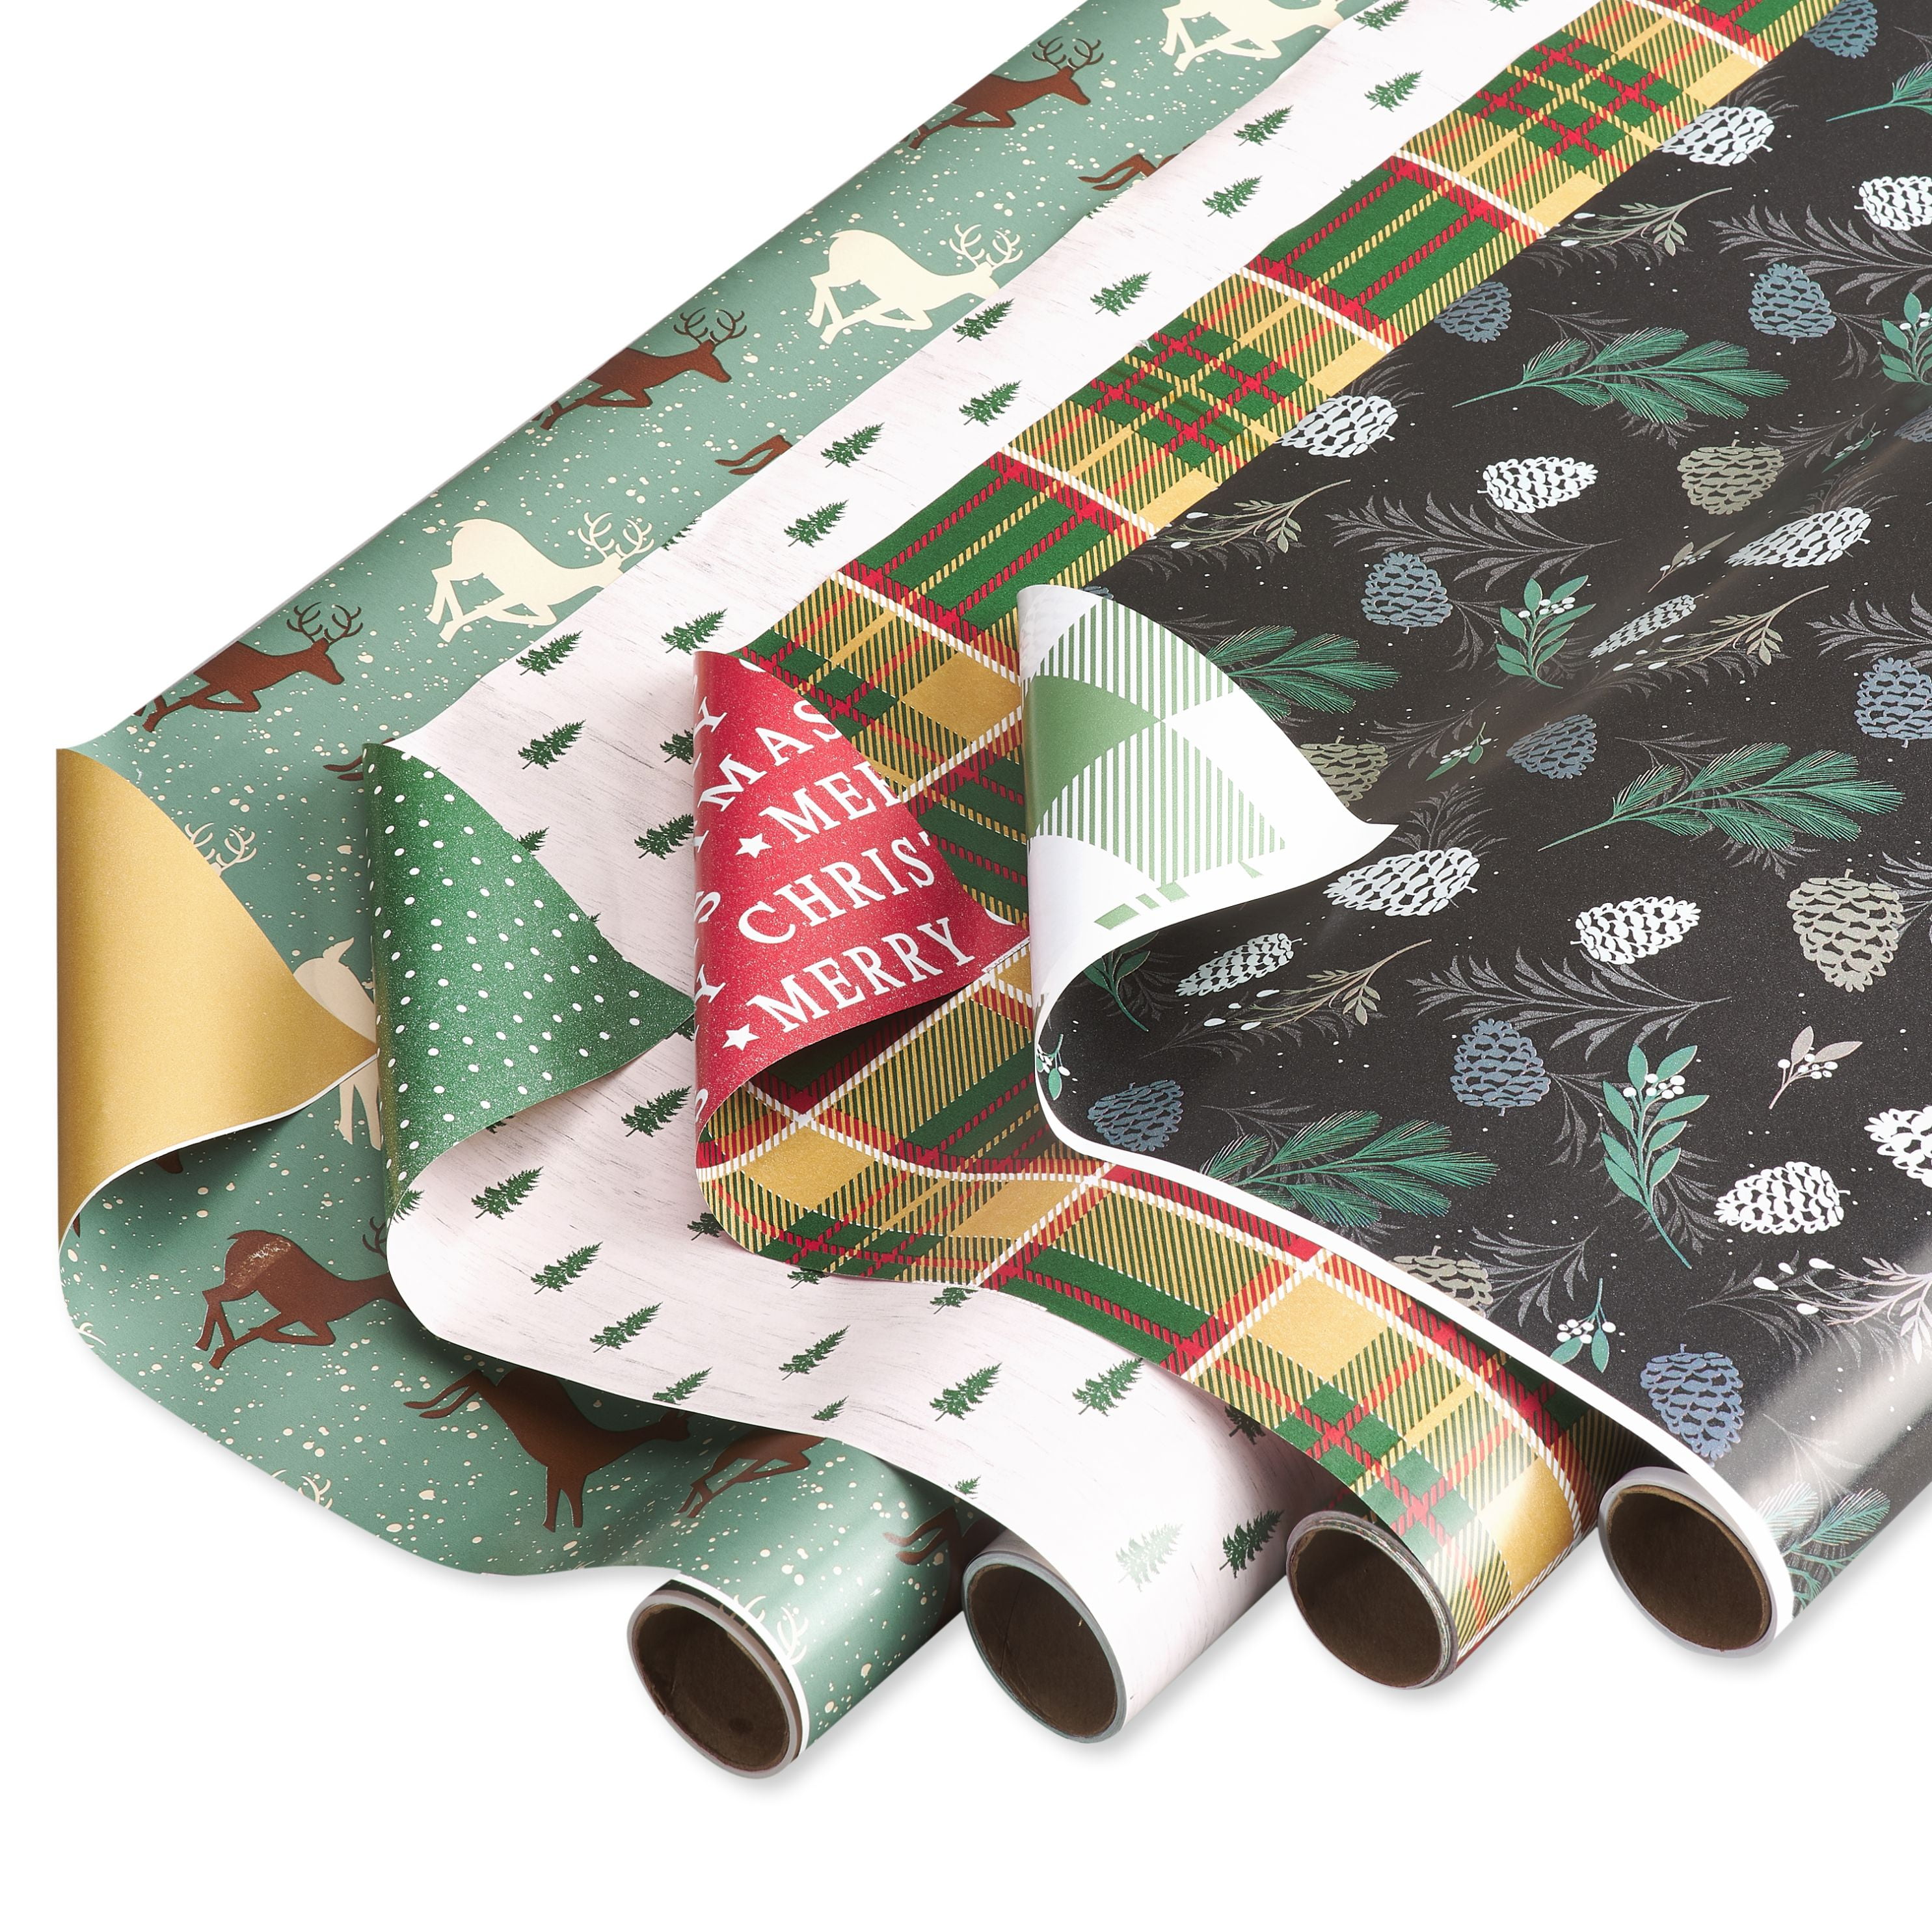 American Greetings Christmas Reversible Wrapping Paper Festive Designs (4  Rolls, 160 Sq. ft.) 